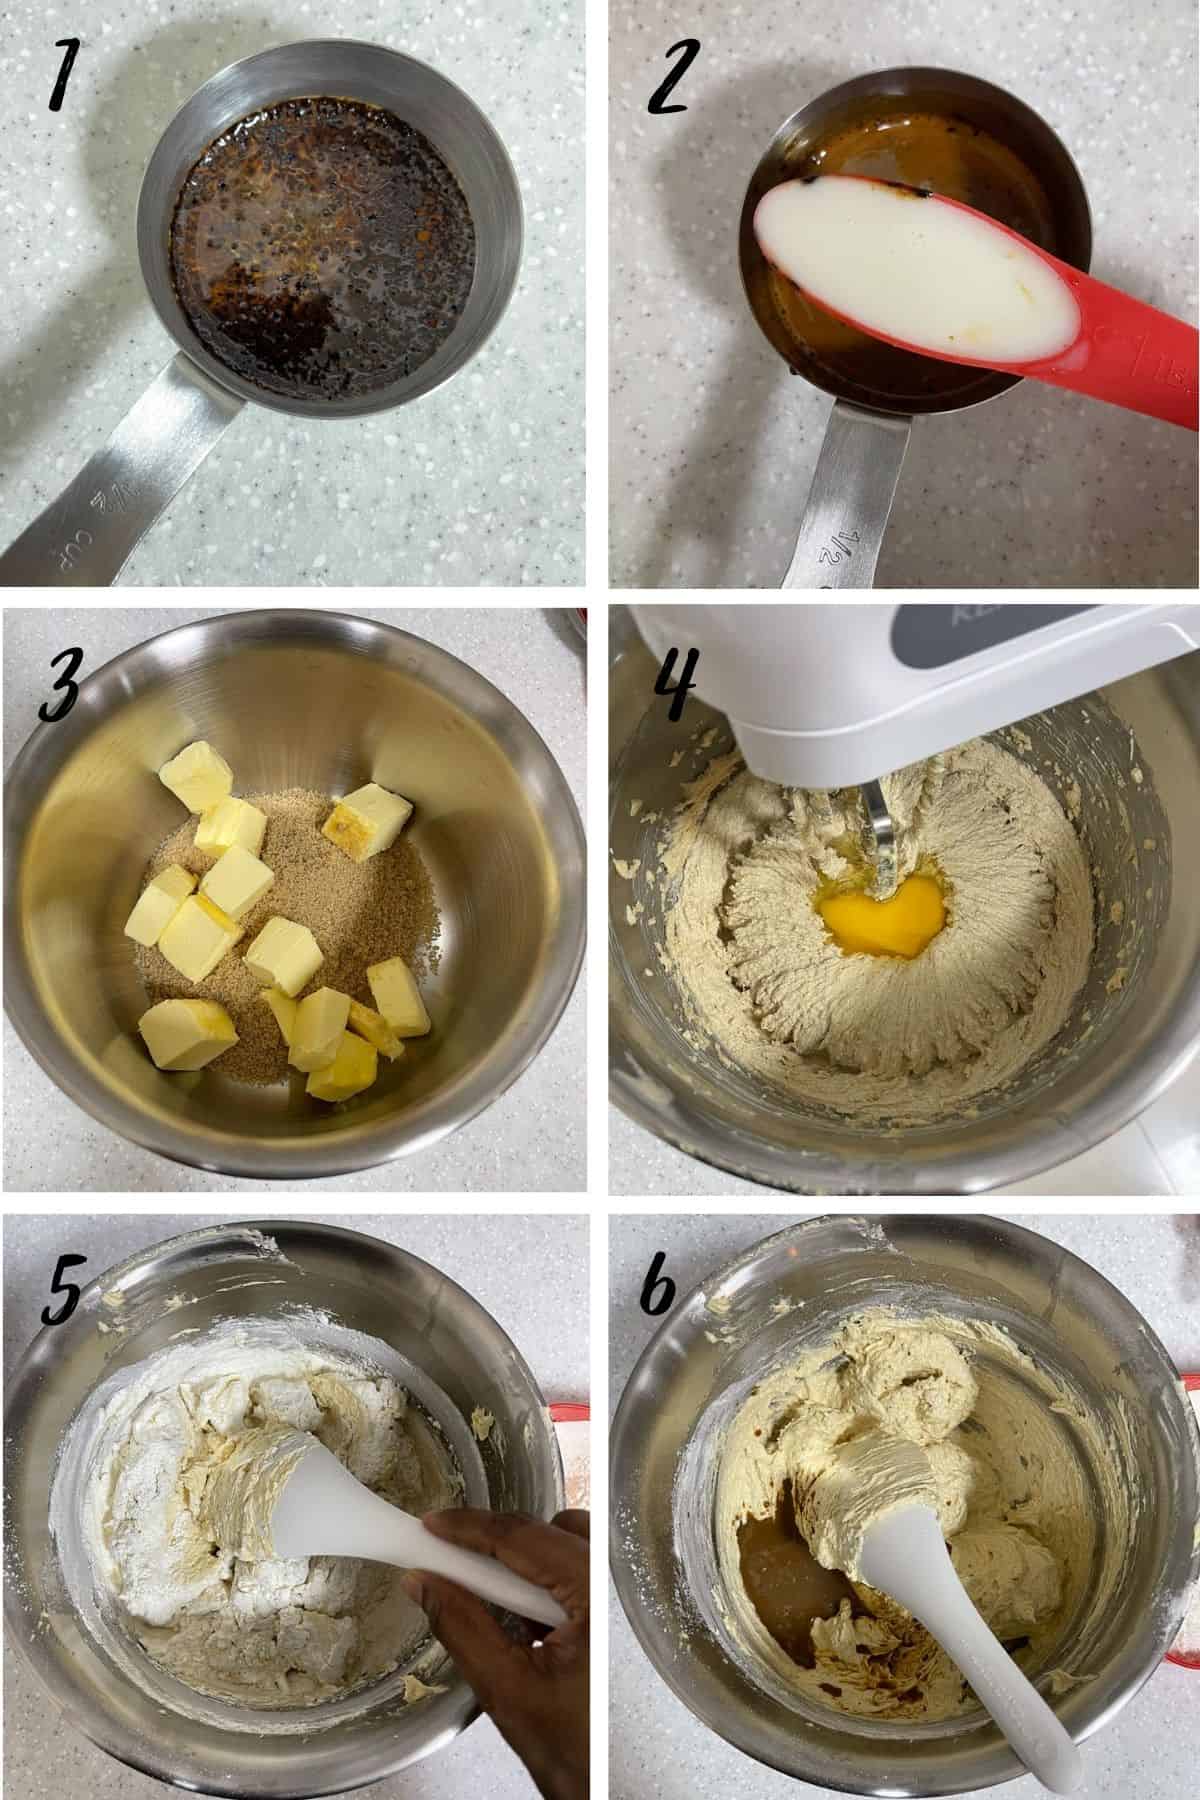 A poster of 6 images showing how to mix instant coffee cake batter.